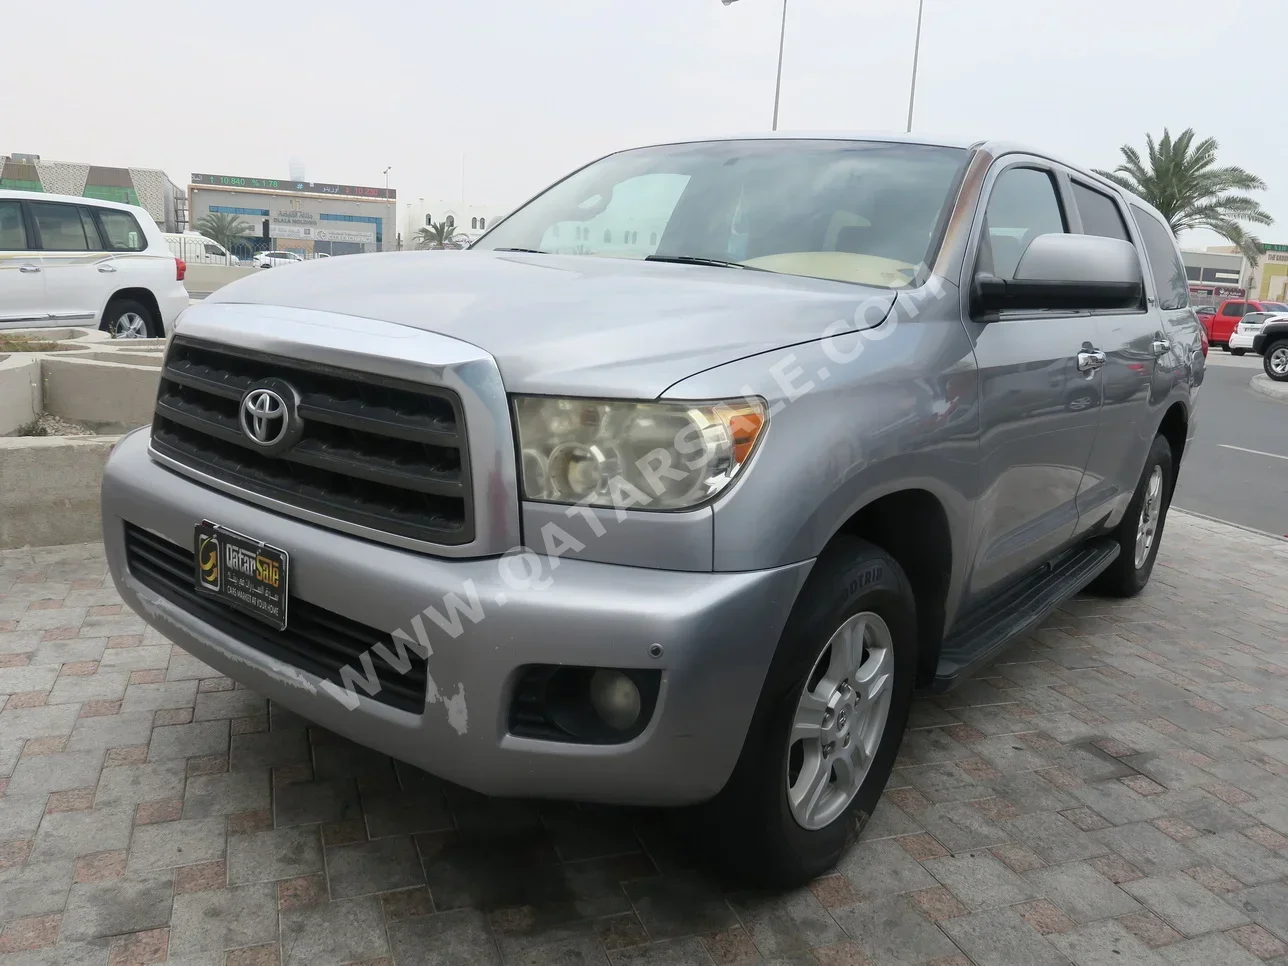 Toyota  Sequoia  2012  Automatic  348,000 Km  8 Cylinder  Four Wheel Drive (4WD)  SUV  Gray